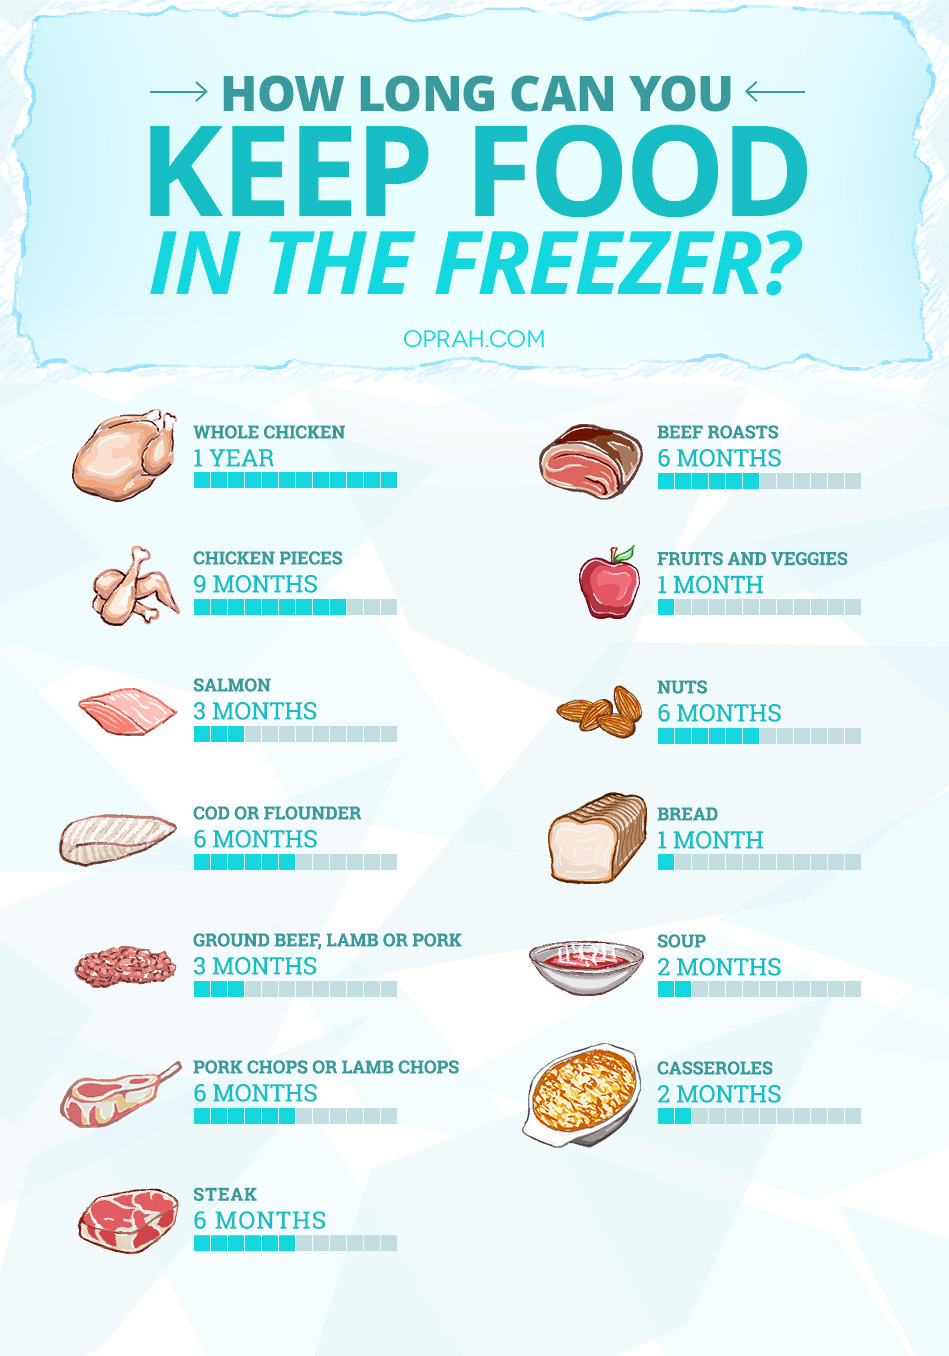 How Long Does Frozen Chicken Last After Expiration Date?